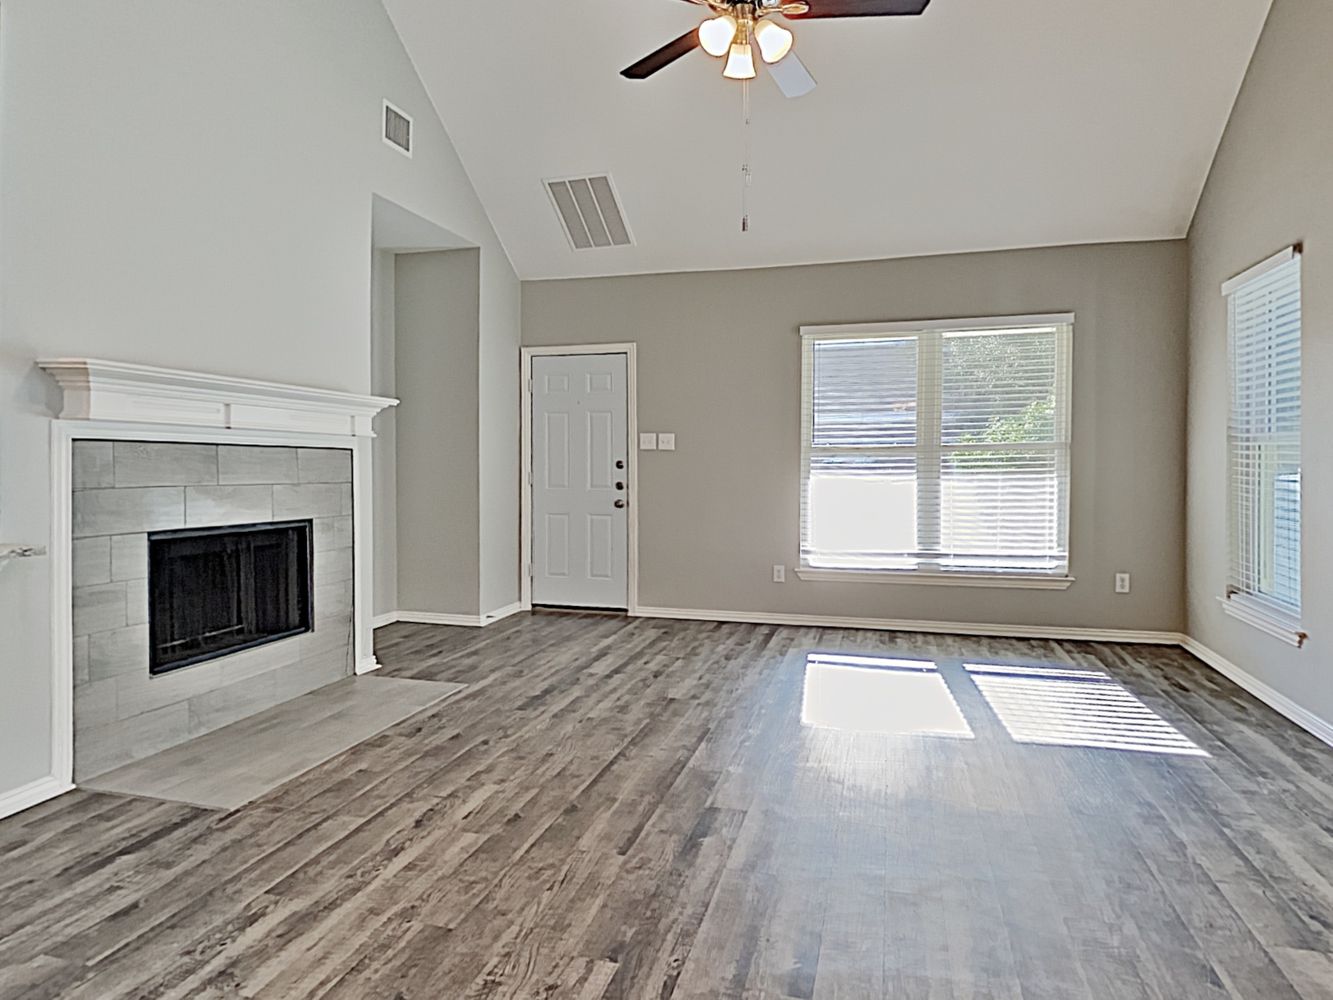 Cozy family room with vinyl plank flooring and fireplace at Invitation Homes Houston.